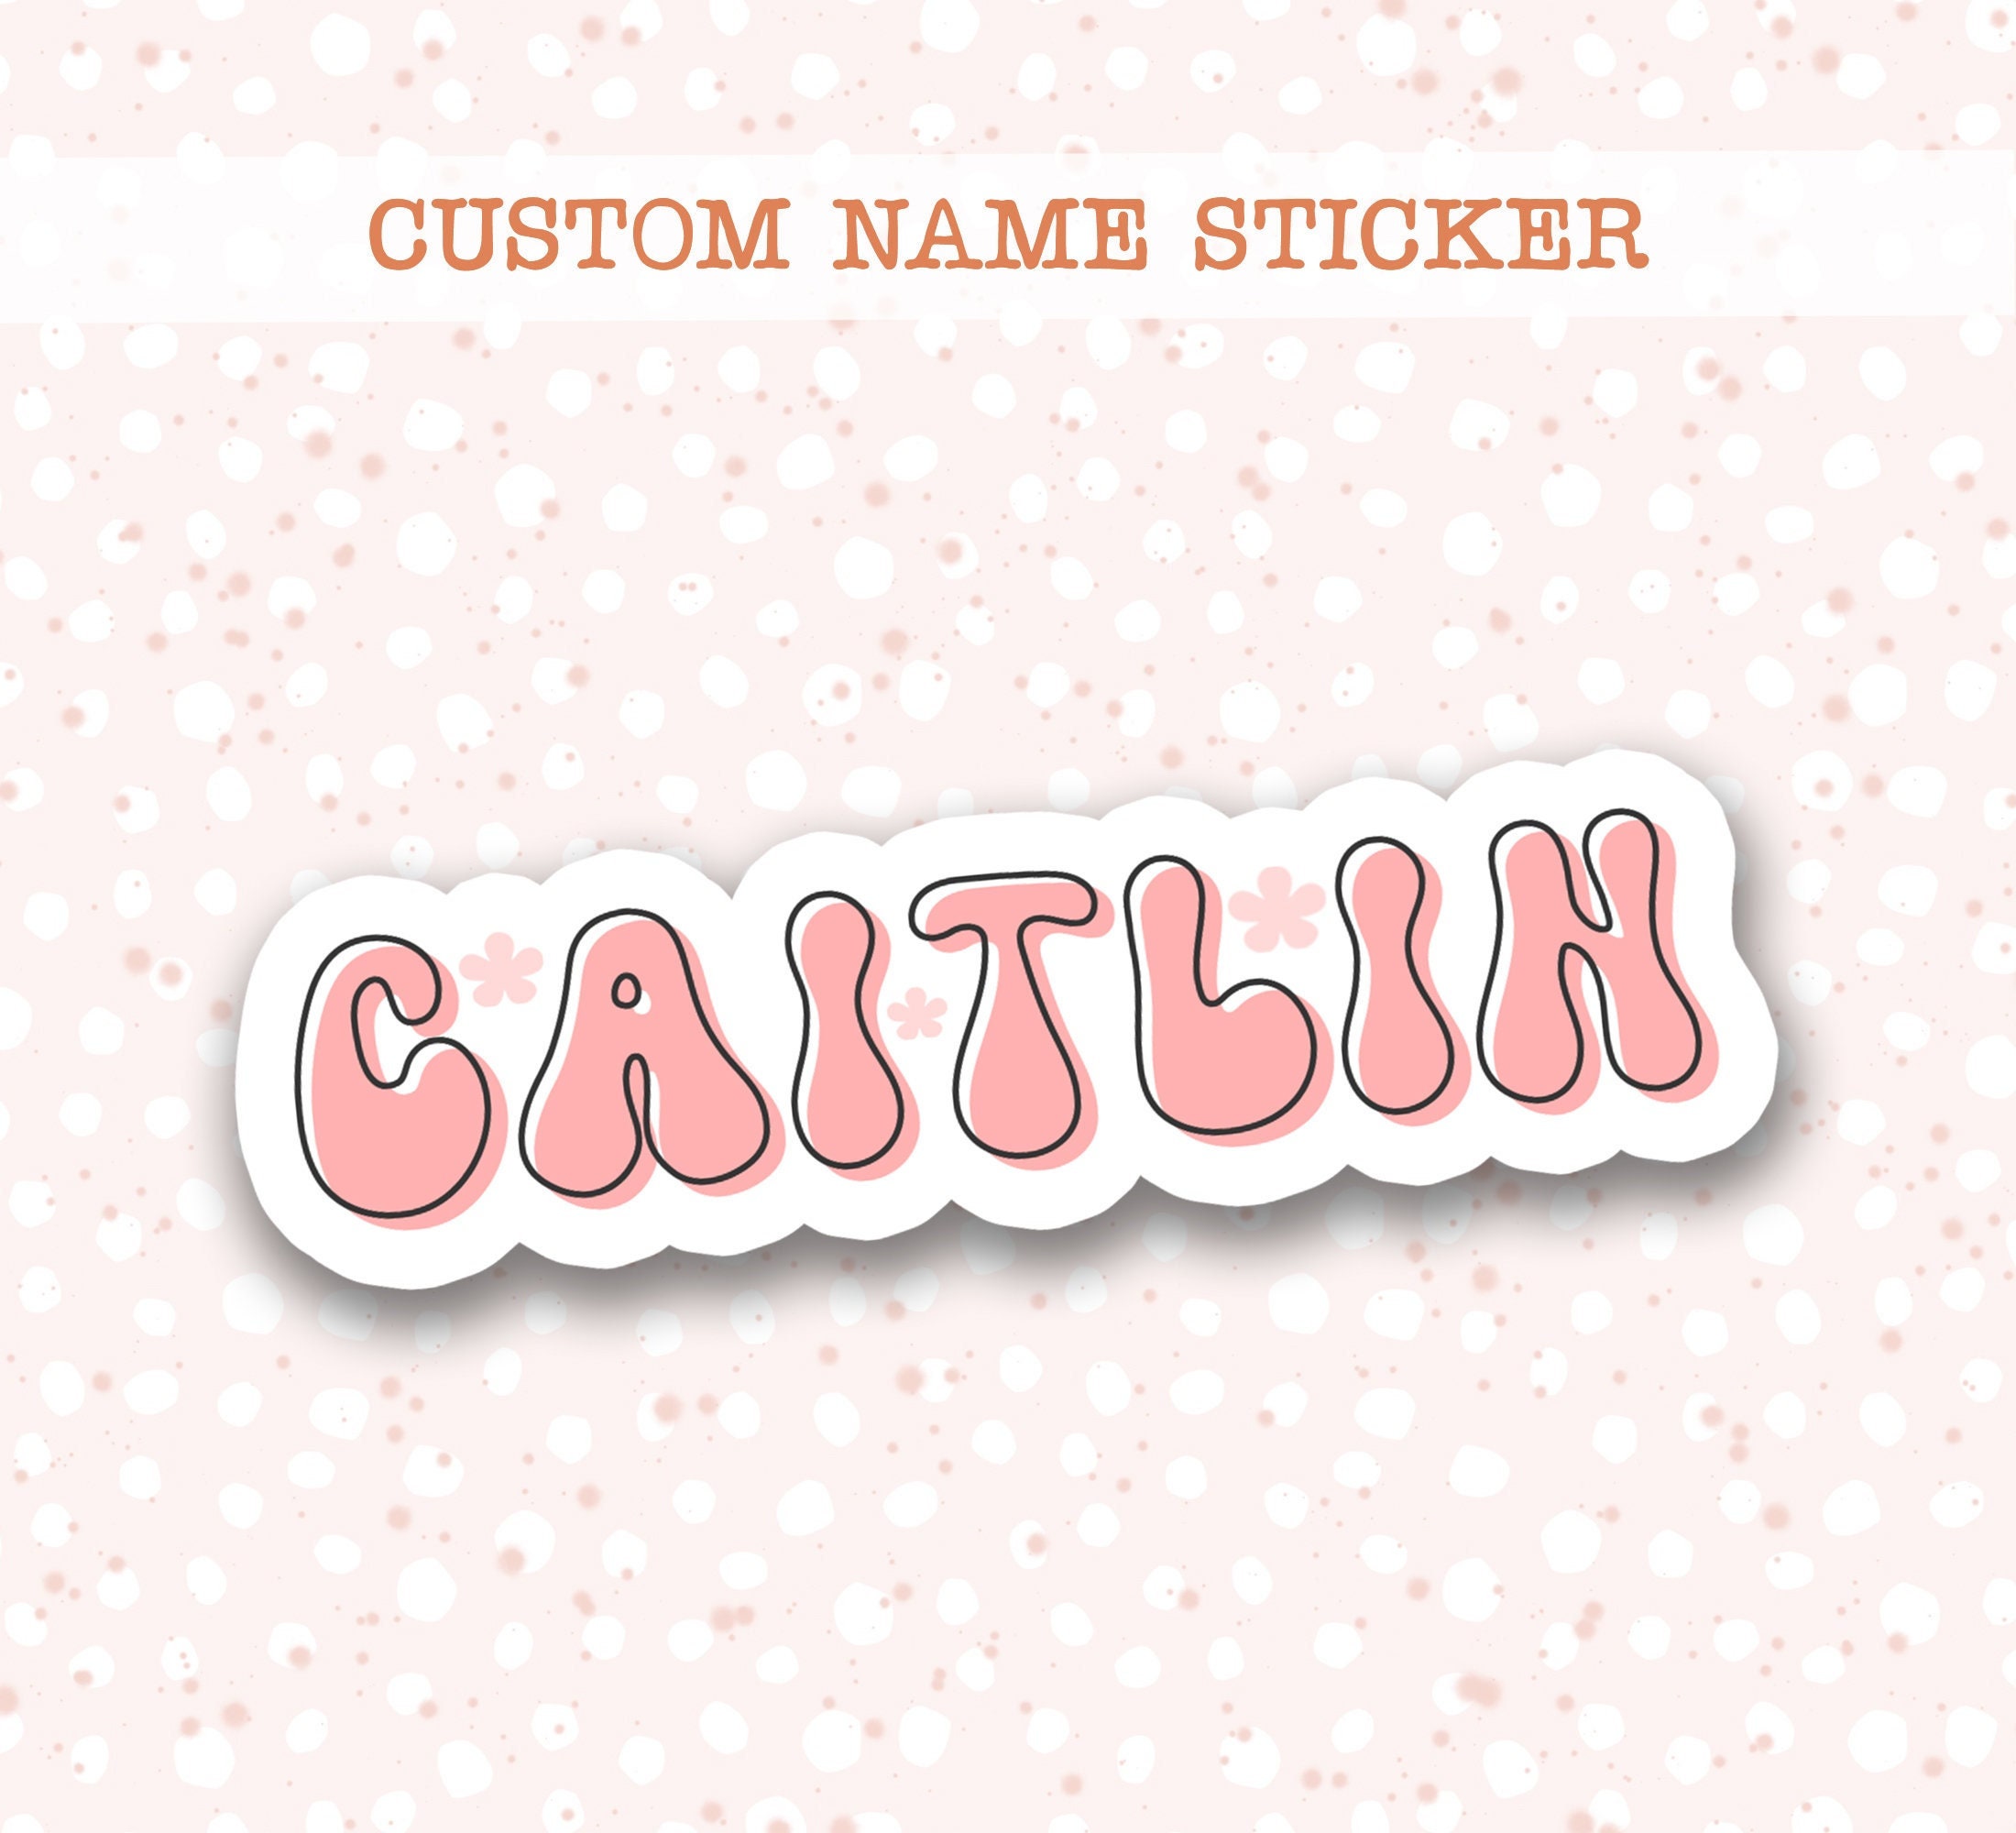 Clear Bubble Stickers, Bubbles Stickers, Cute Stickers, Kids Stickers 